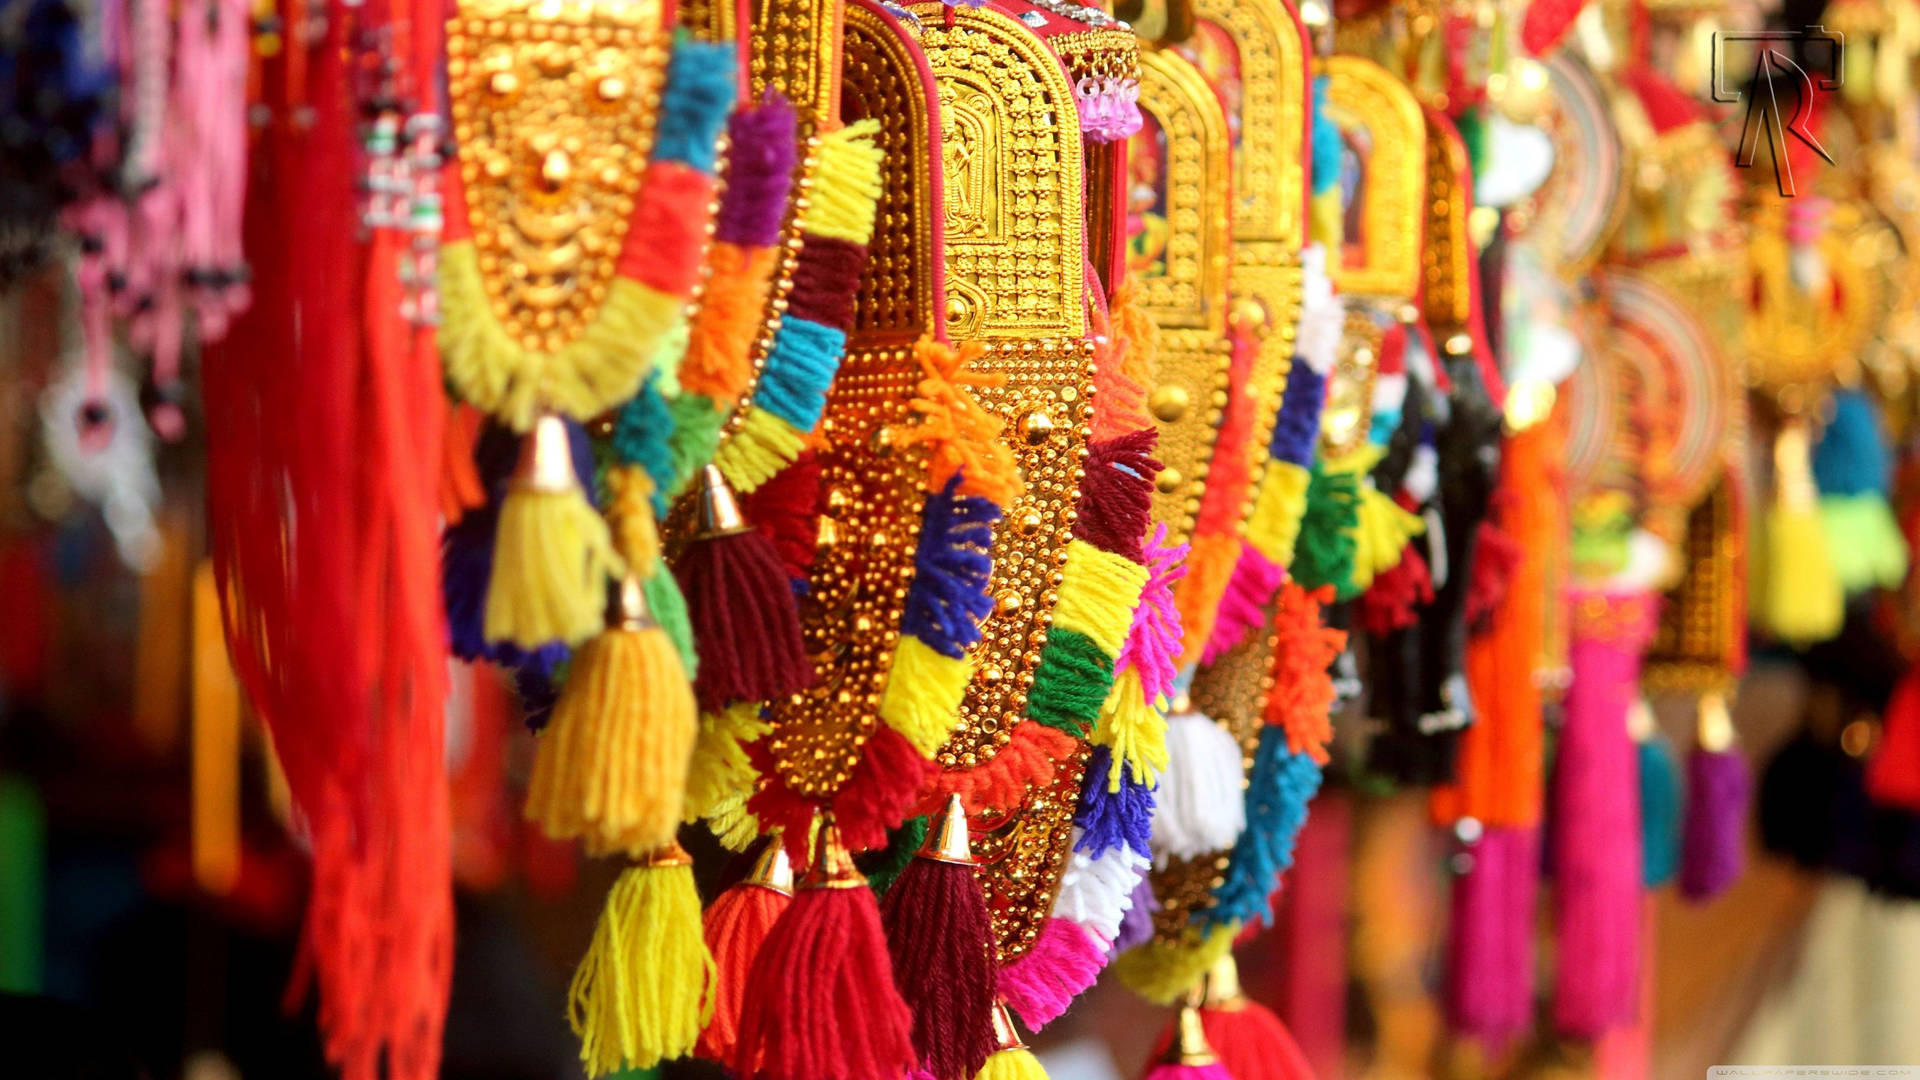 Colorful Necklaces In India Background